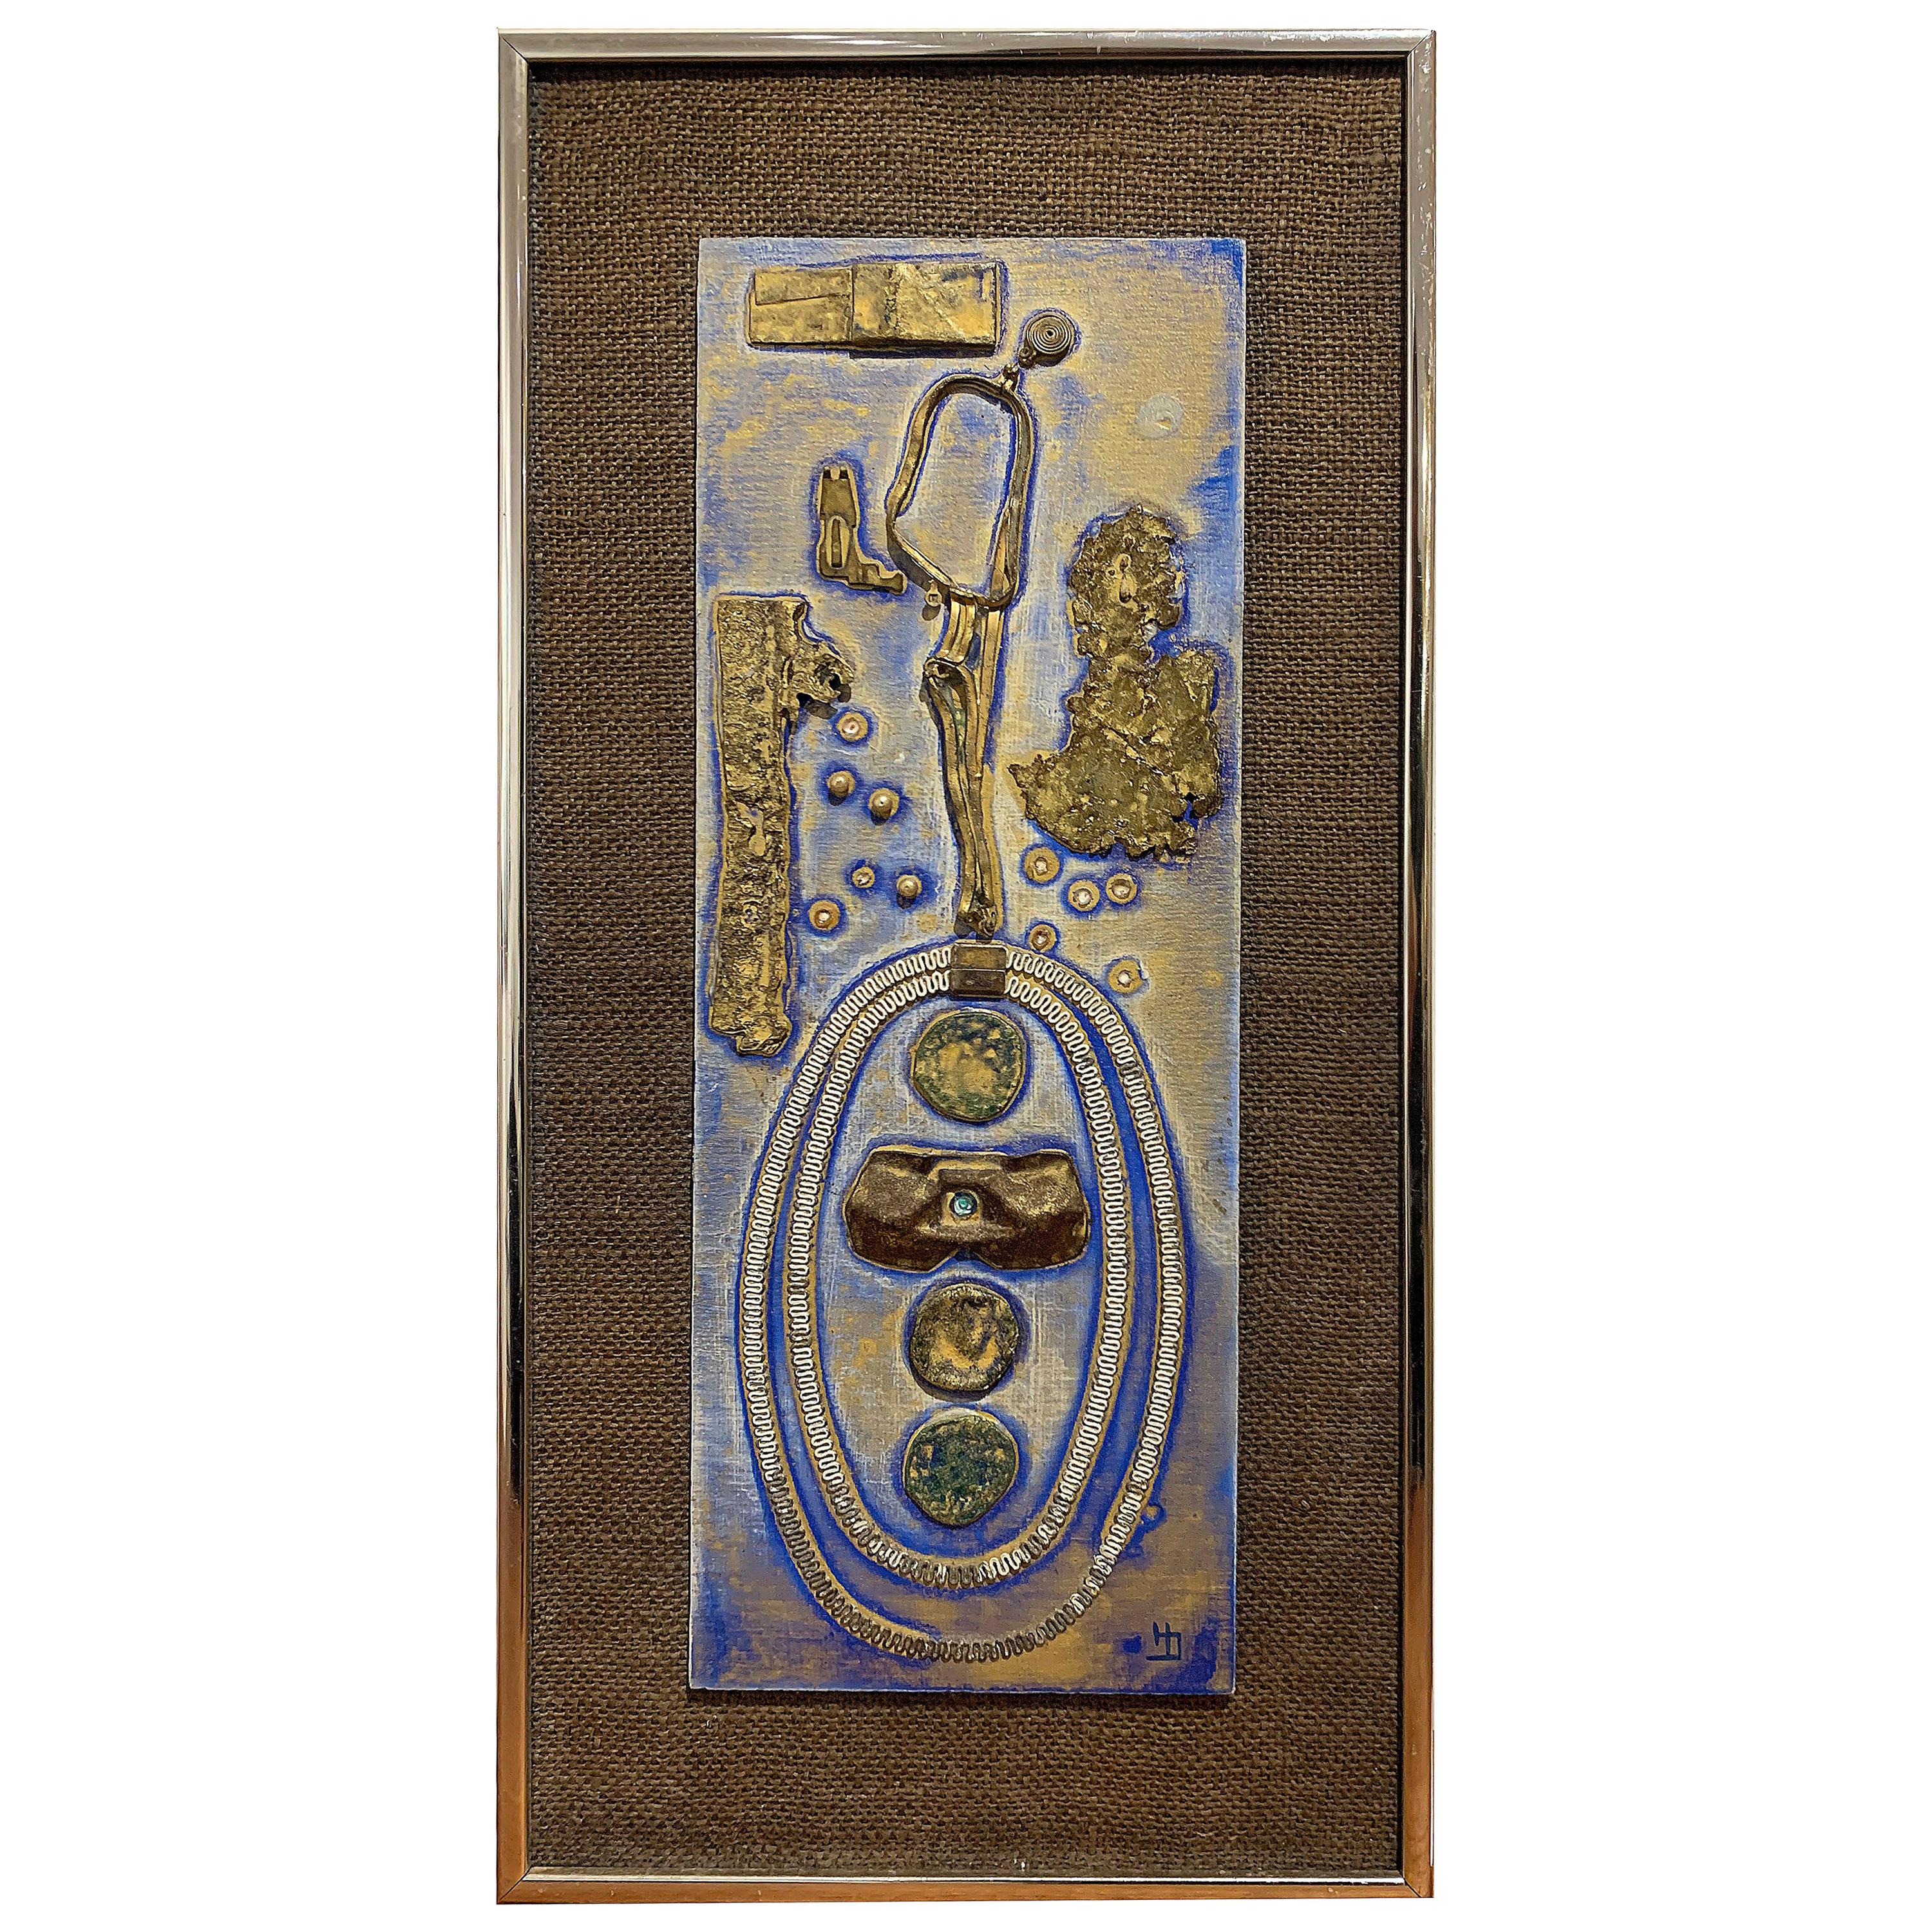 Assemblage Metal on Wood Over Burlap, "The Lady's Boudoir"  For Sale